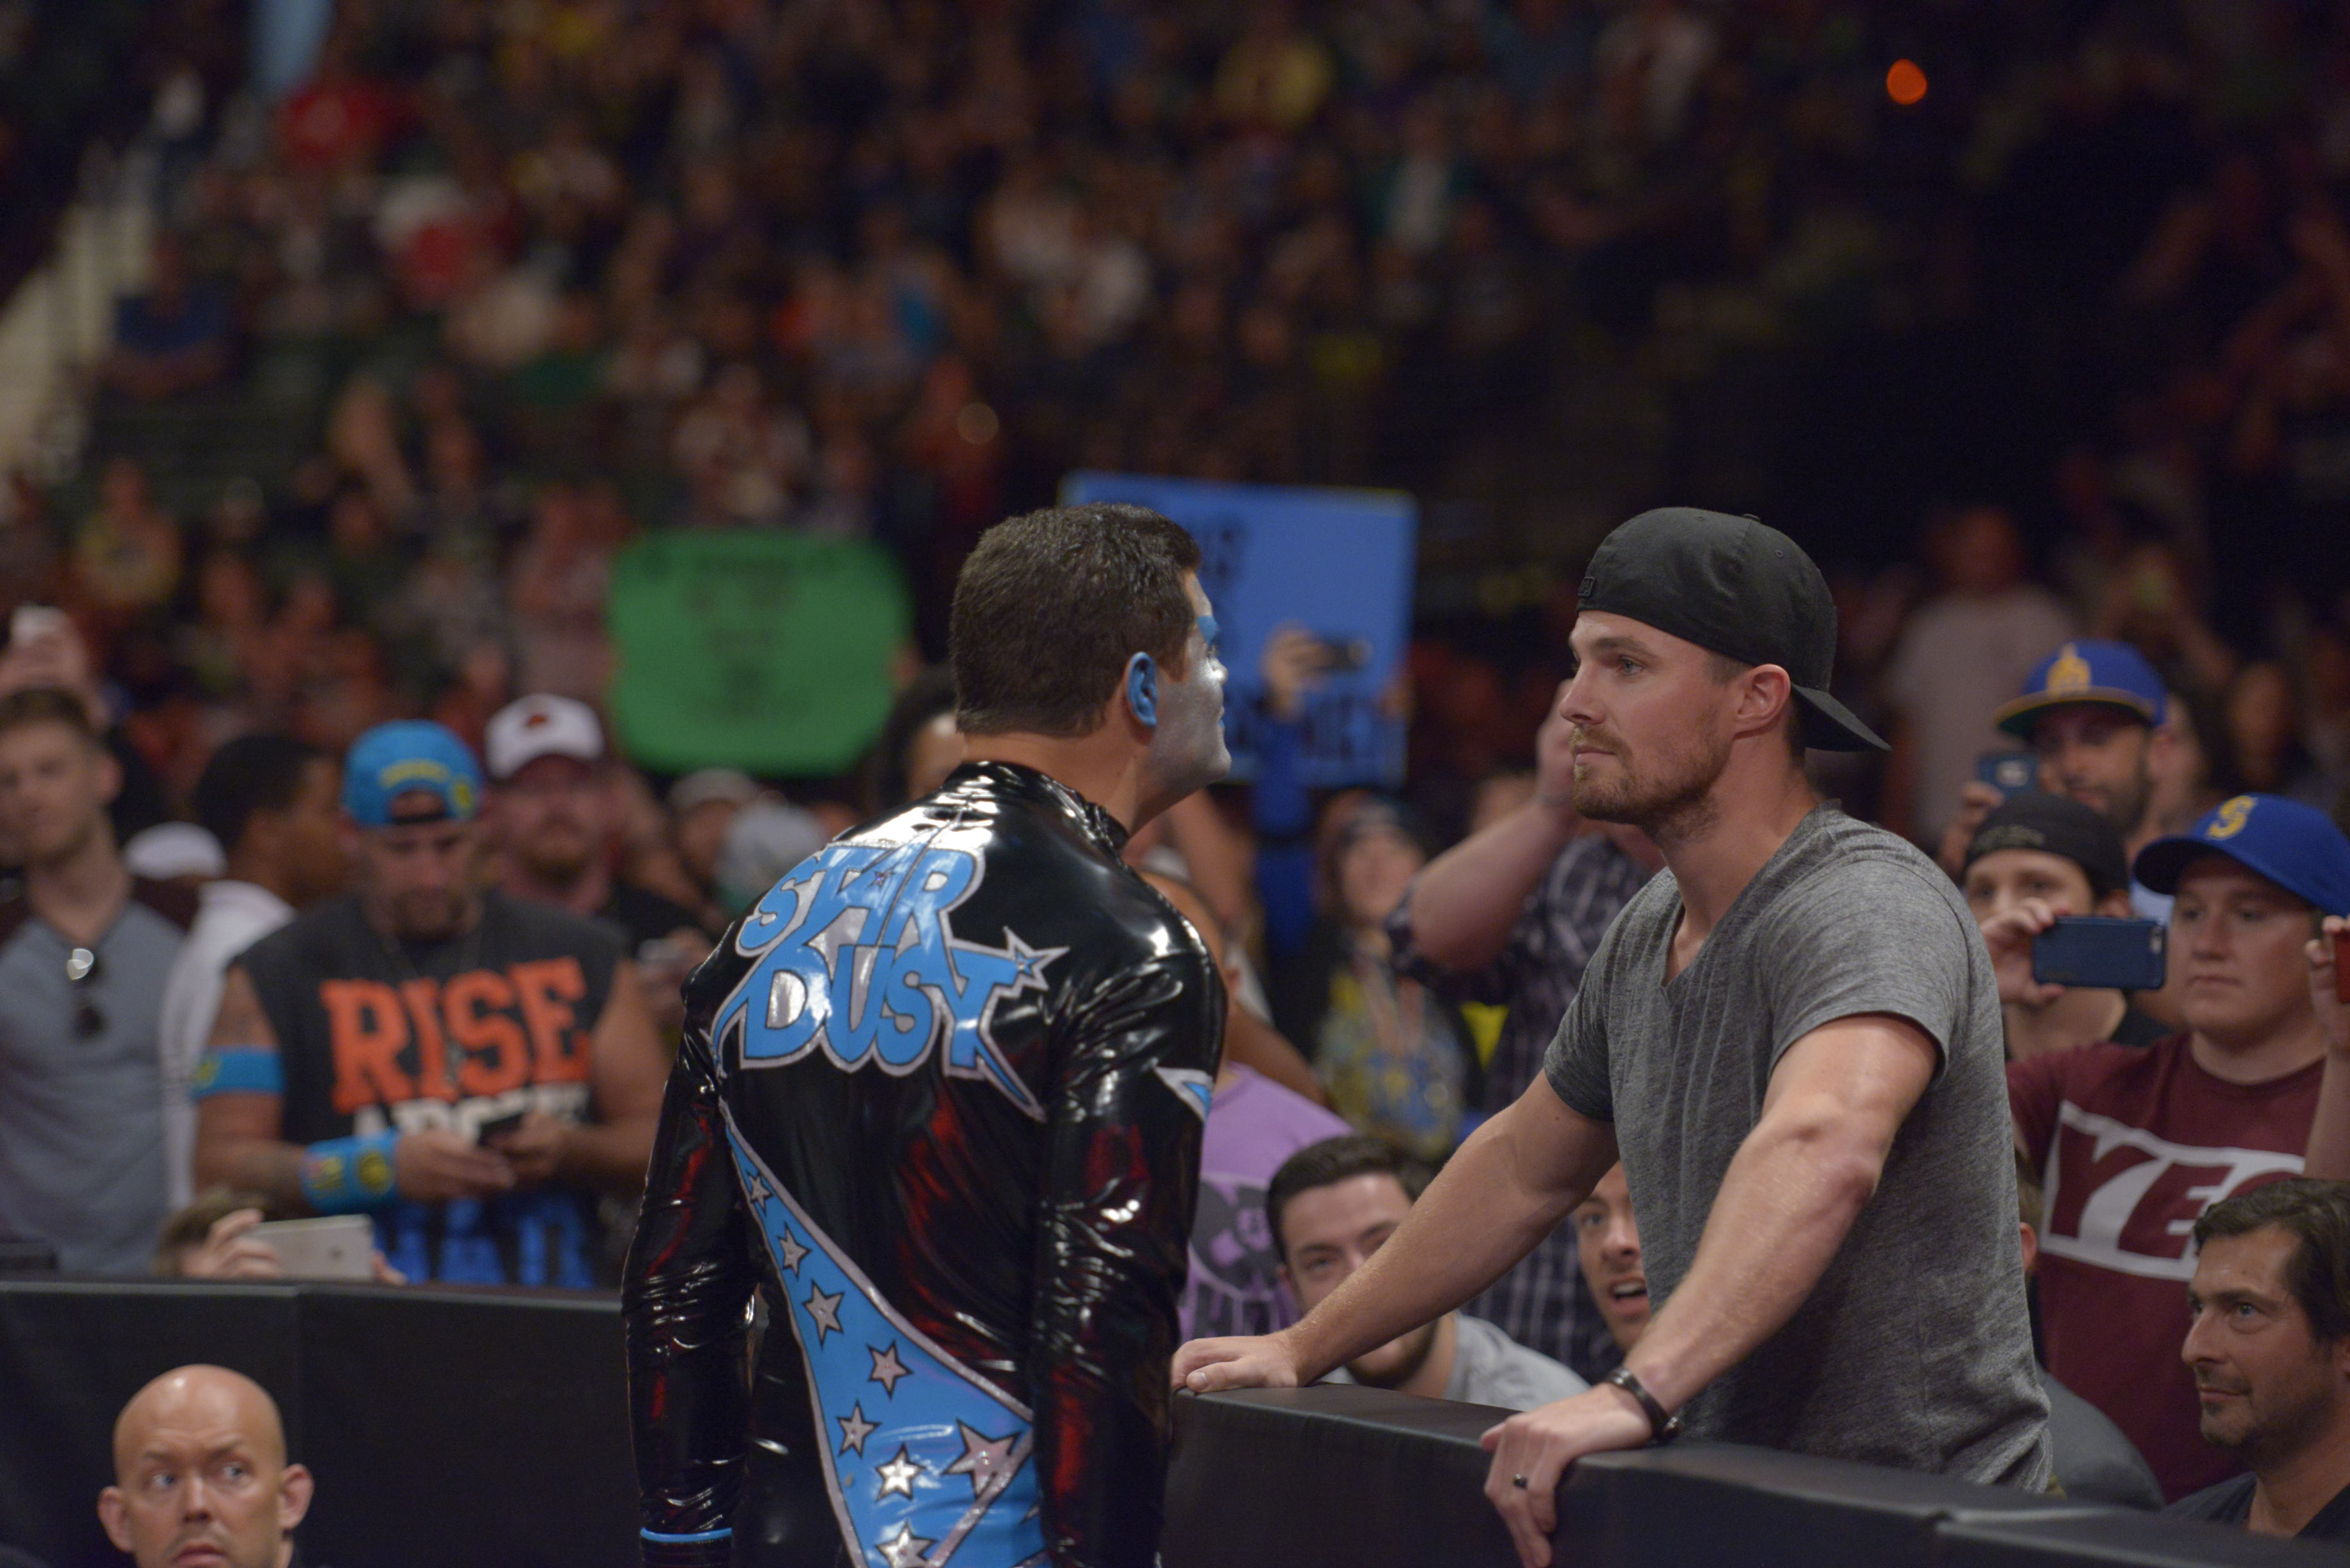 Stephen Amell and Stardust